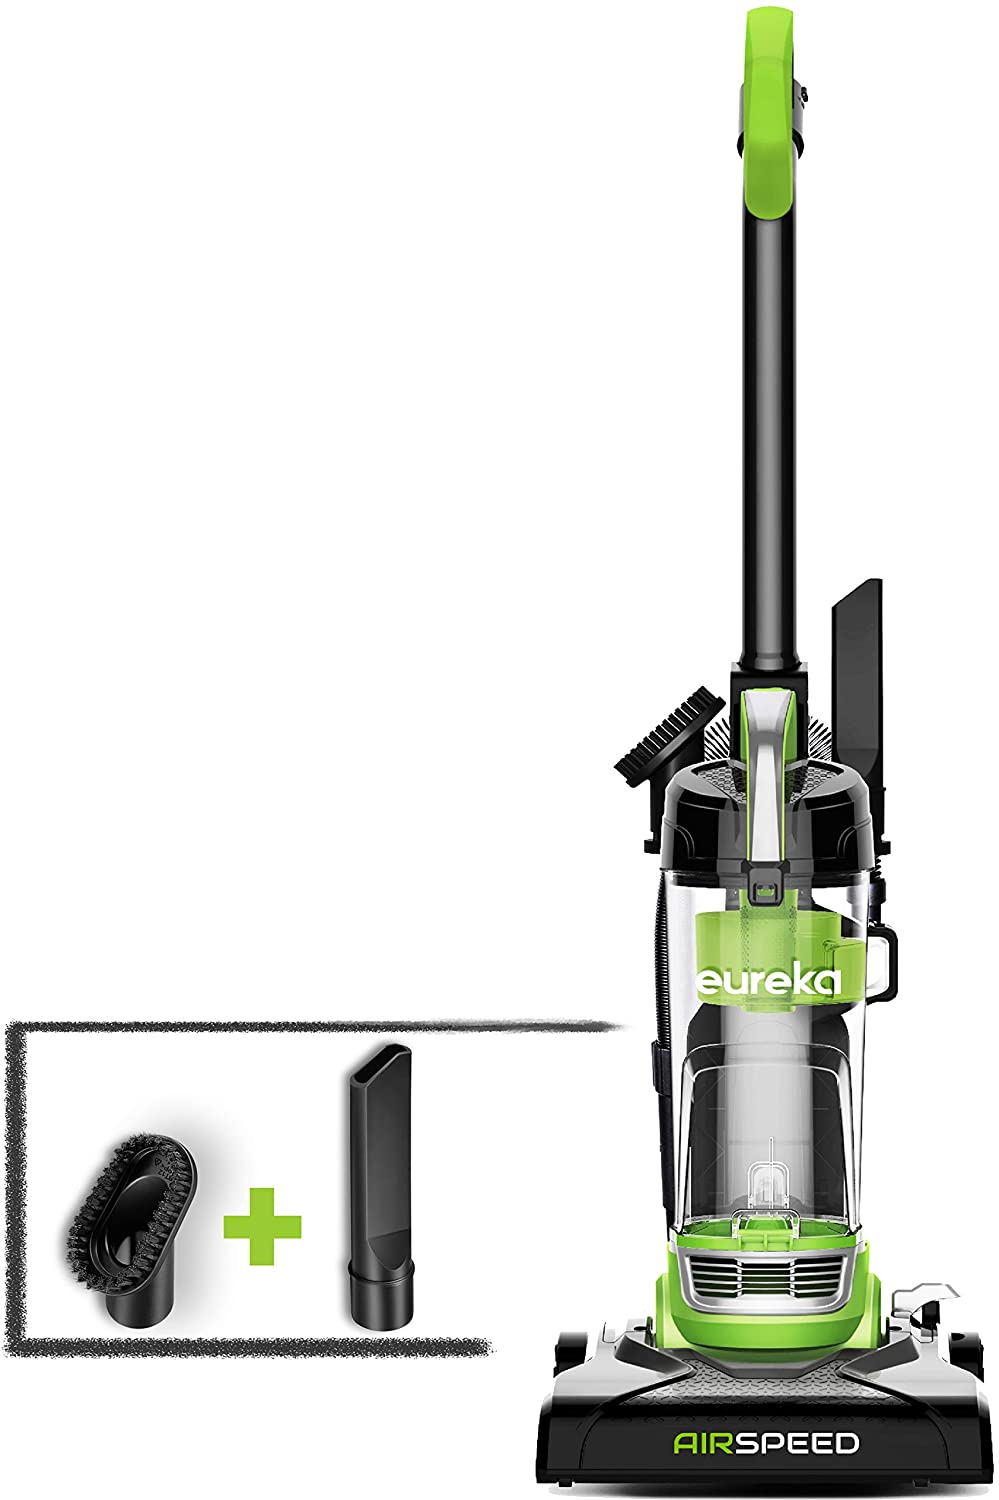 Review of EUREKA Airspeed Ultra-Lightweight Compact Bagless Upright Vacuum Cleaner, Replacement Filter, Green